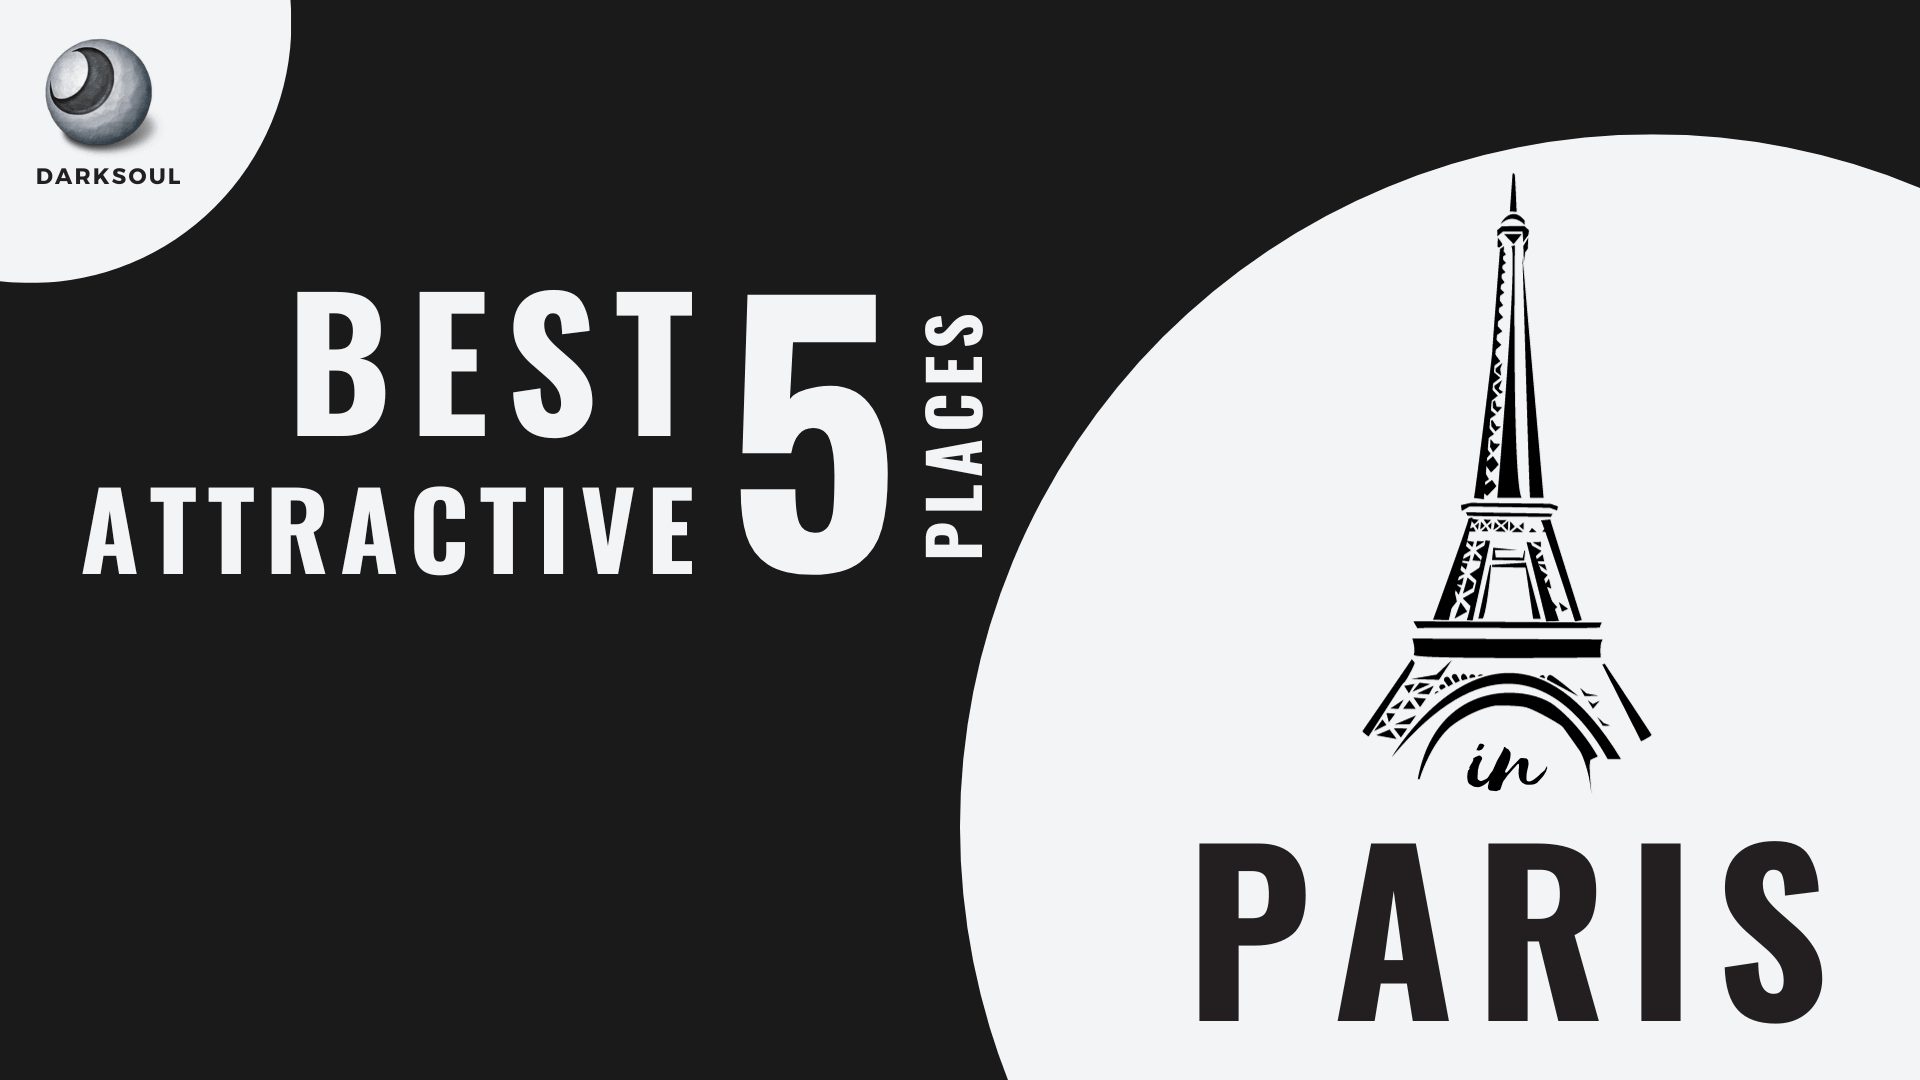 Best 5 attractive places to visit in Paris - cover image